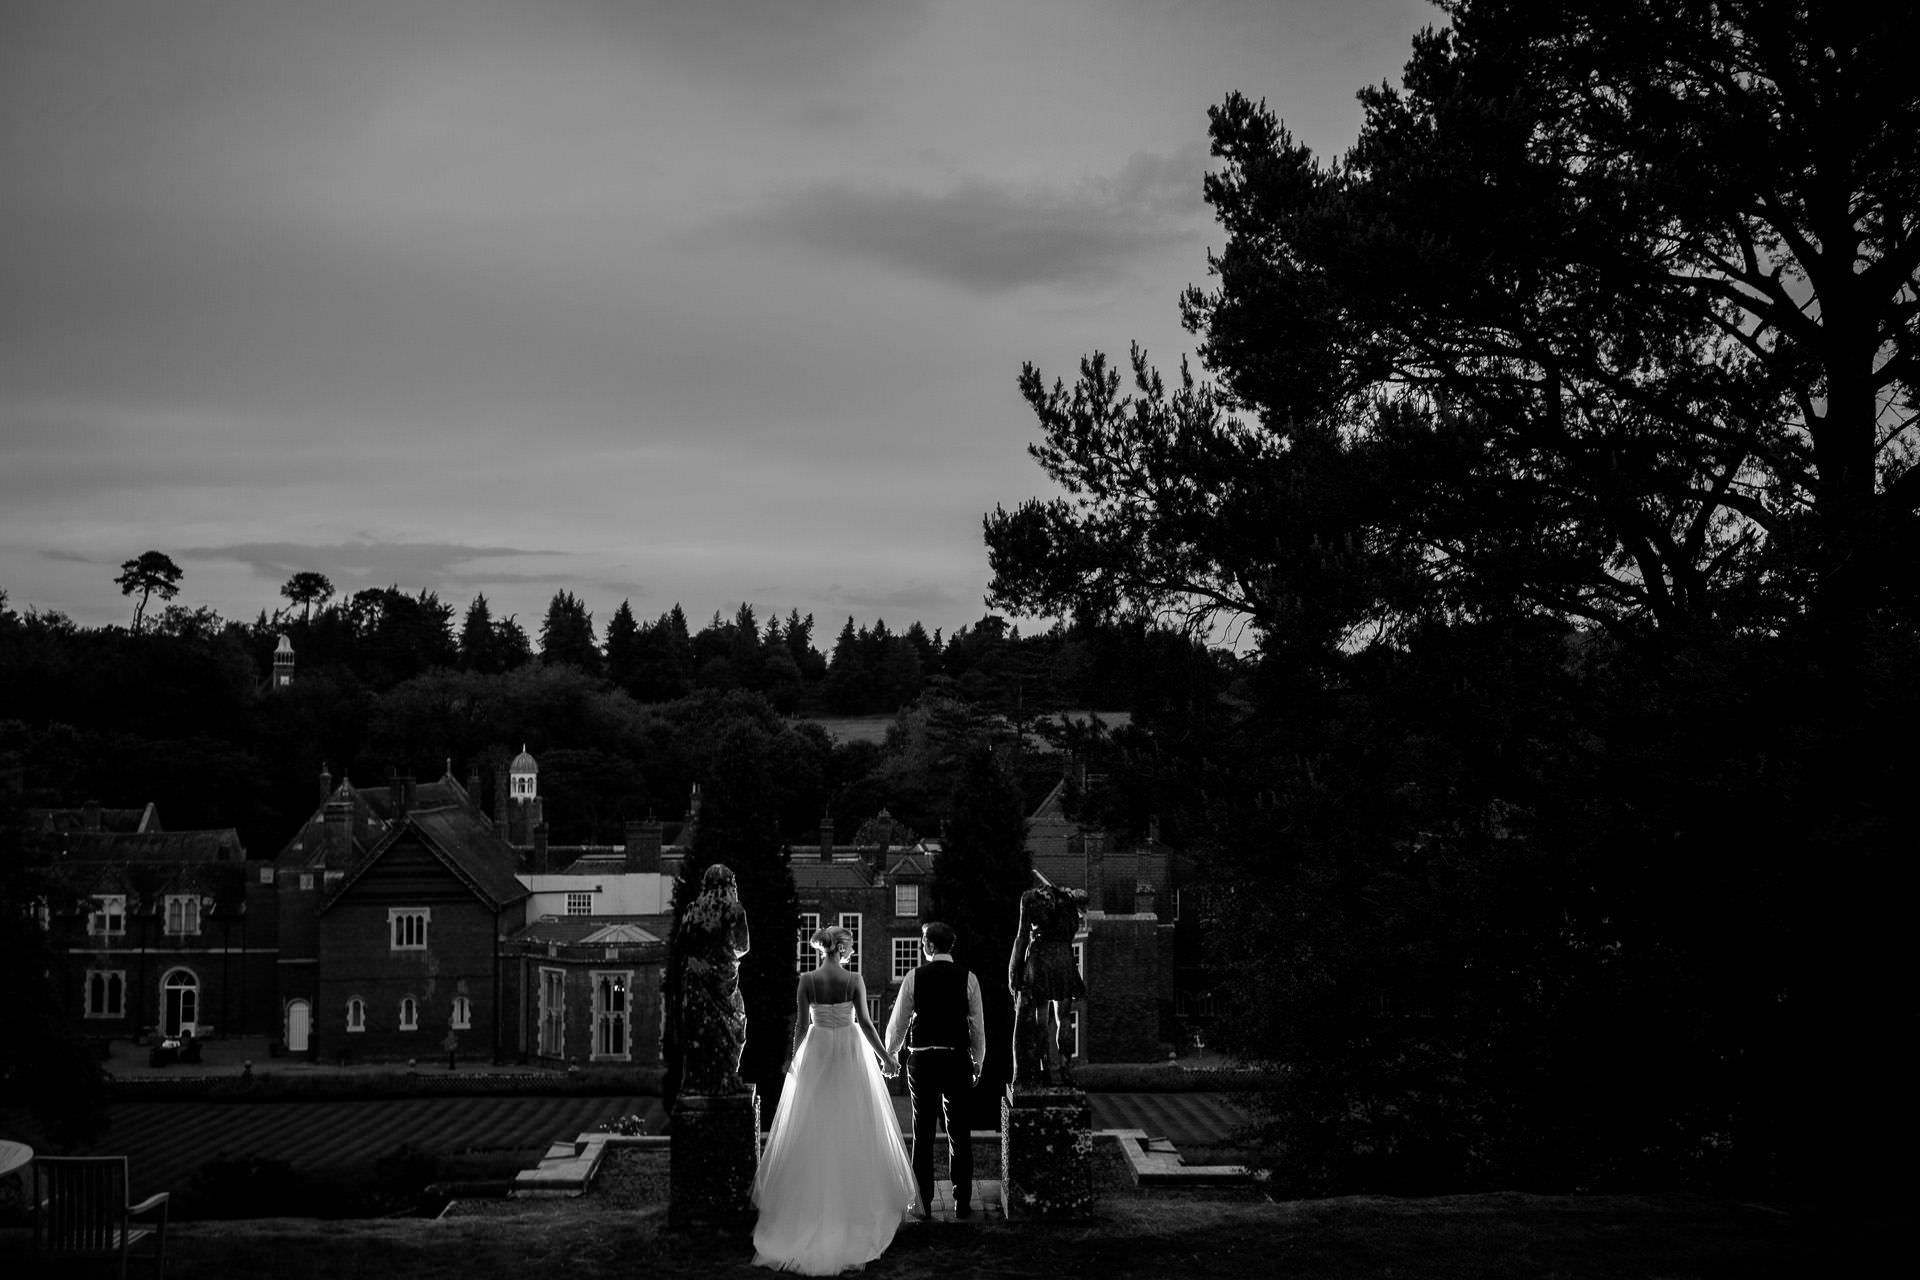 Wotton House wedding evening photo shoot with the view on the venue